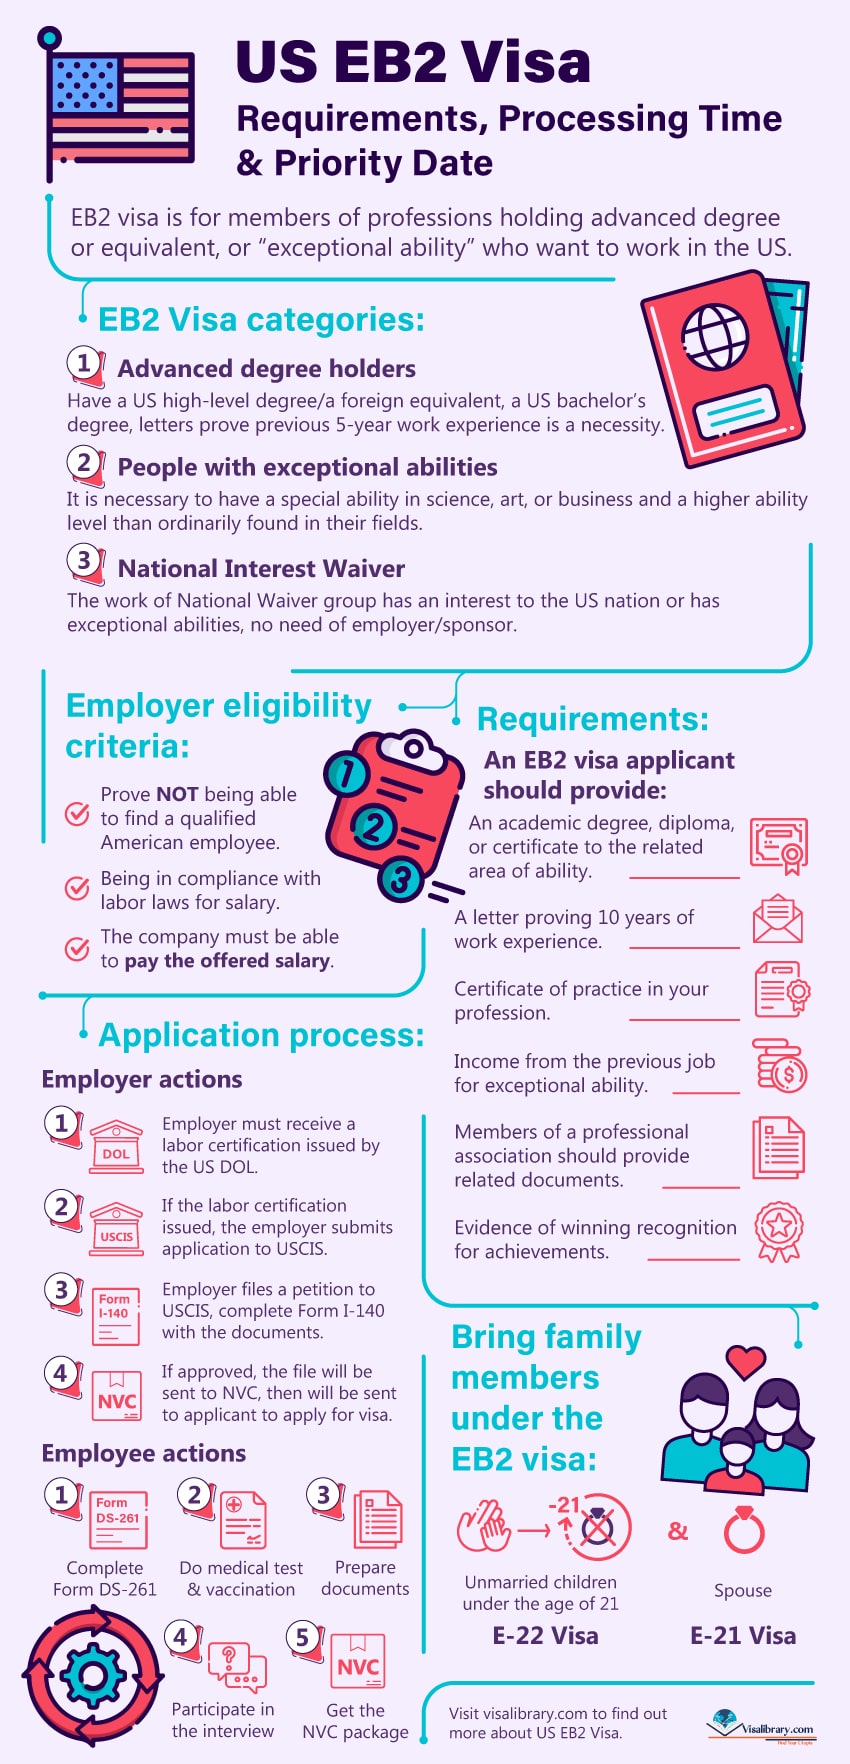 Infographic US EB2 Visa: Requirements, Processing Time & Priority Date